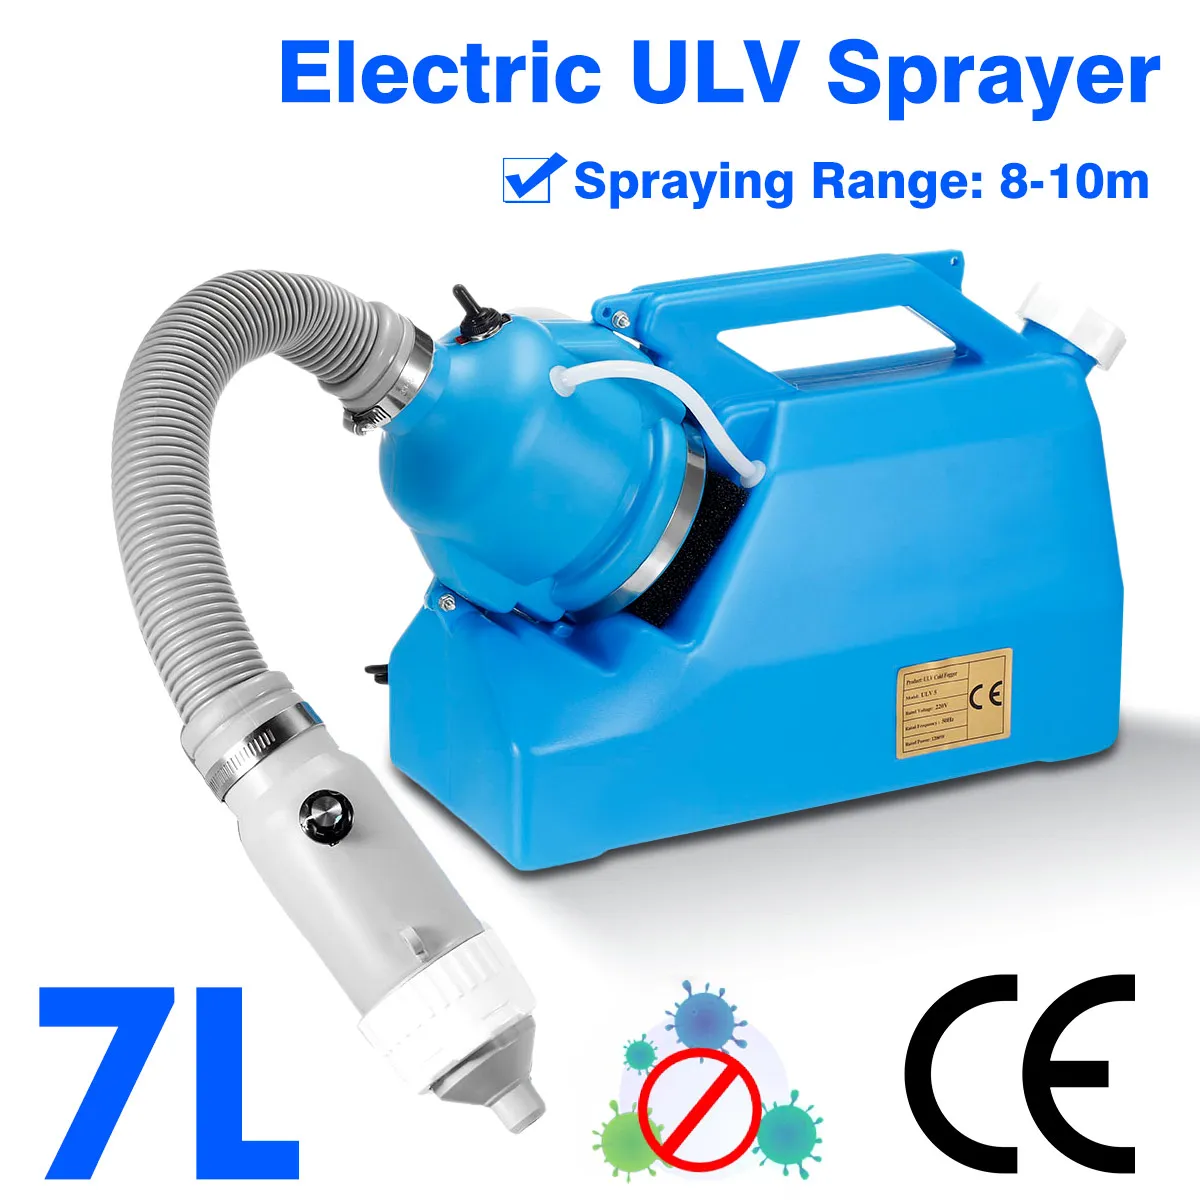 YUELAN 110V 7L Electric ULV Sprayer Portable Fogger Spray Machine 30inch Hose & 19ft Power Cord Smaller Than 50 microns Fog Particles 